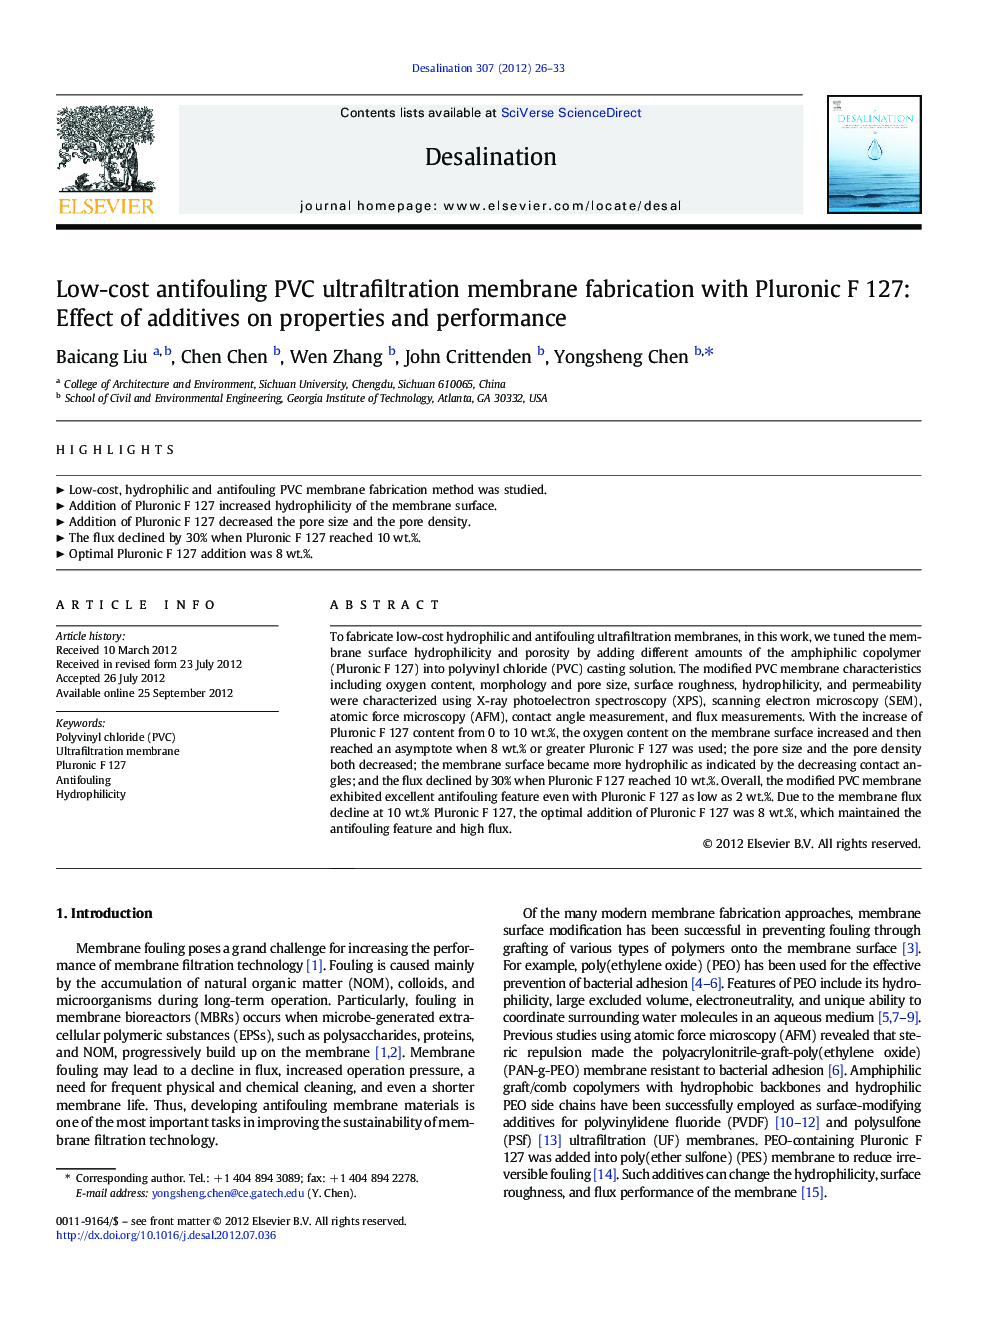 Low-cost antifouling PVC ultrafiltration membrane fabrication with Pluronic F 127: Effect of additives on properties and performance